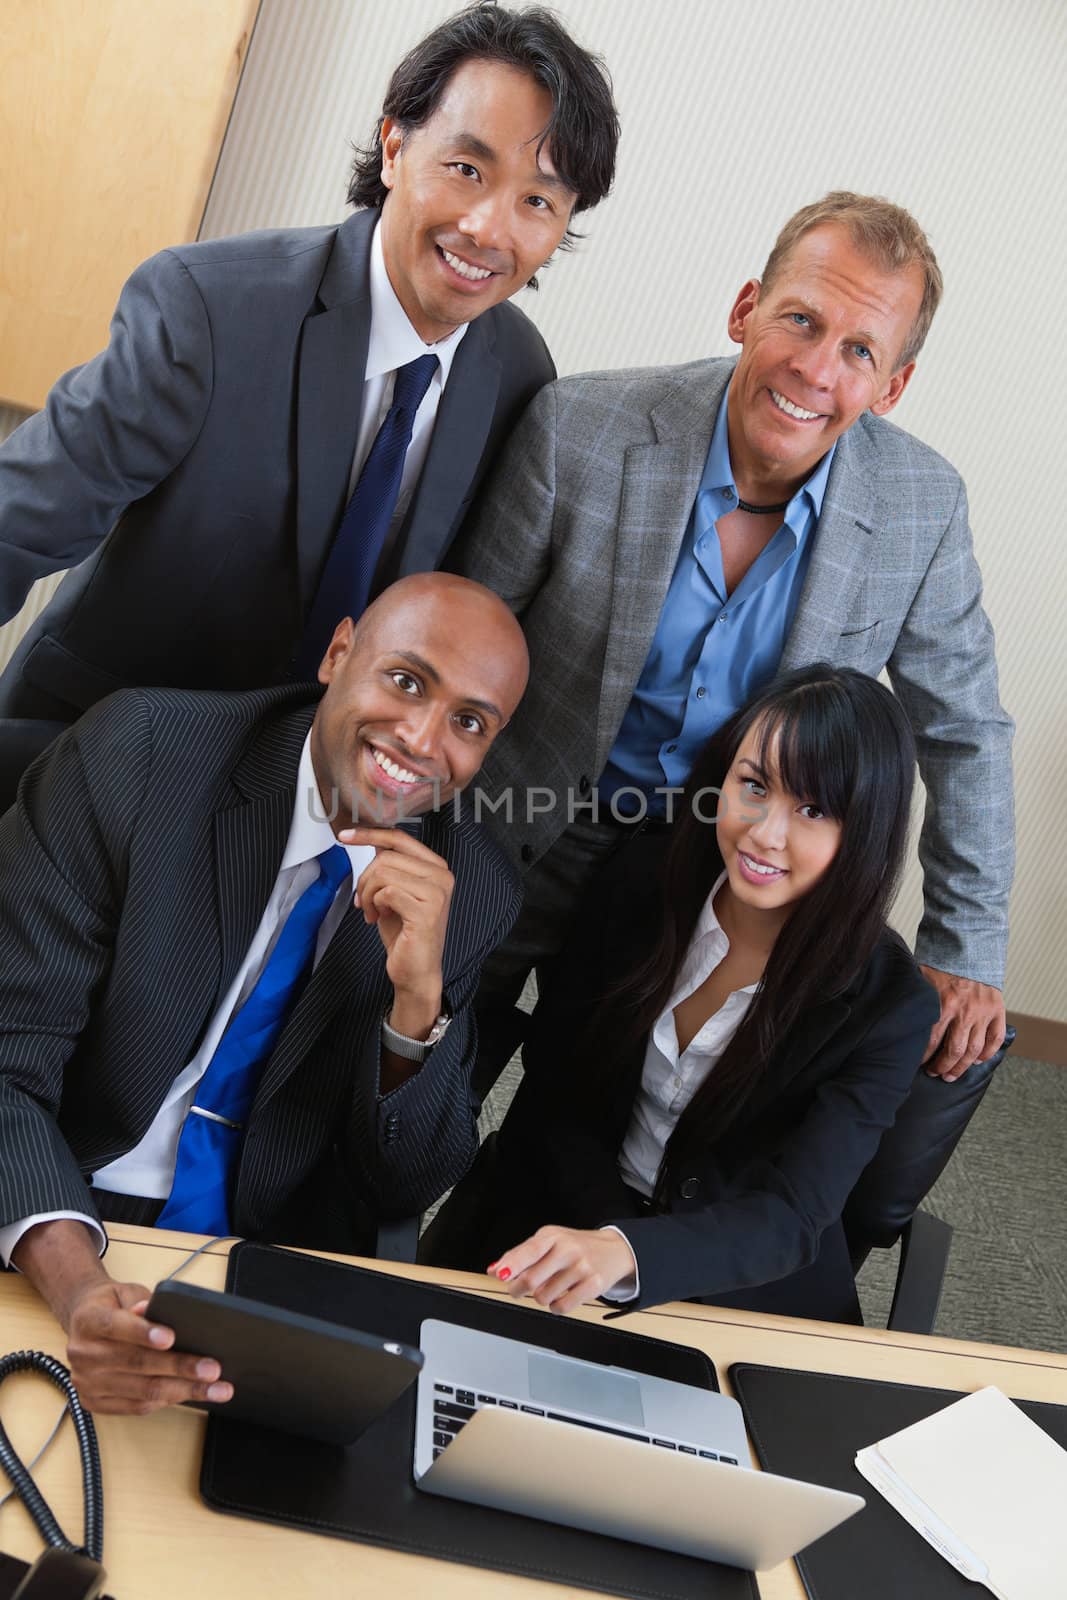 Business people working on laptop together by leaf